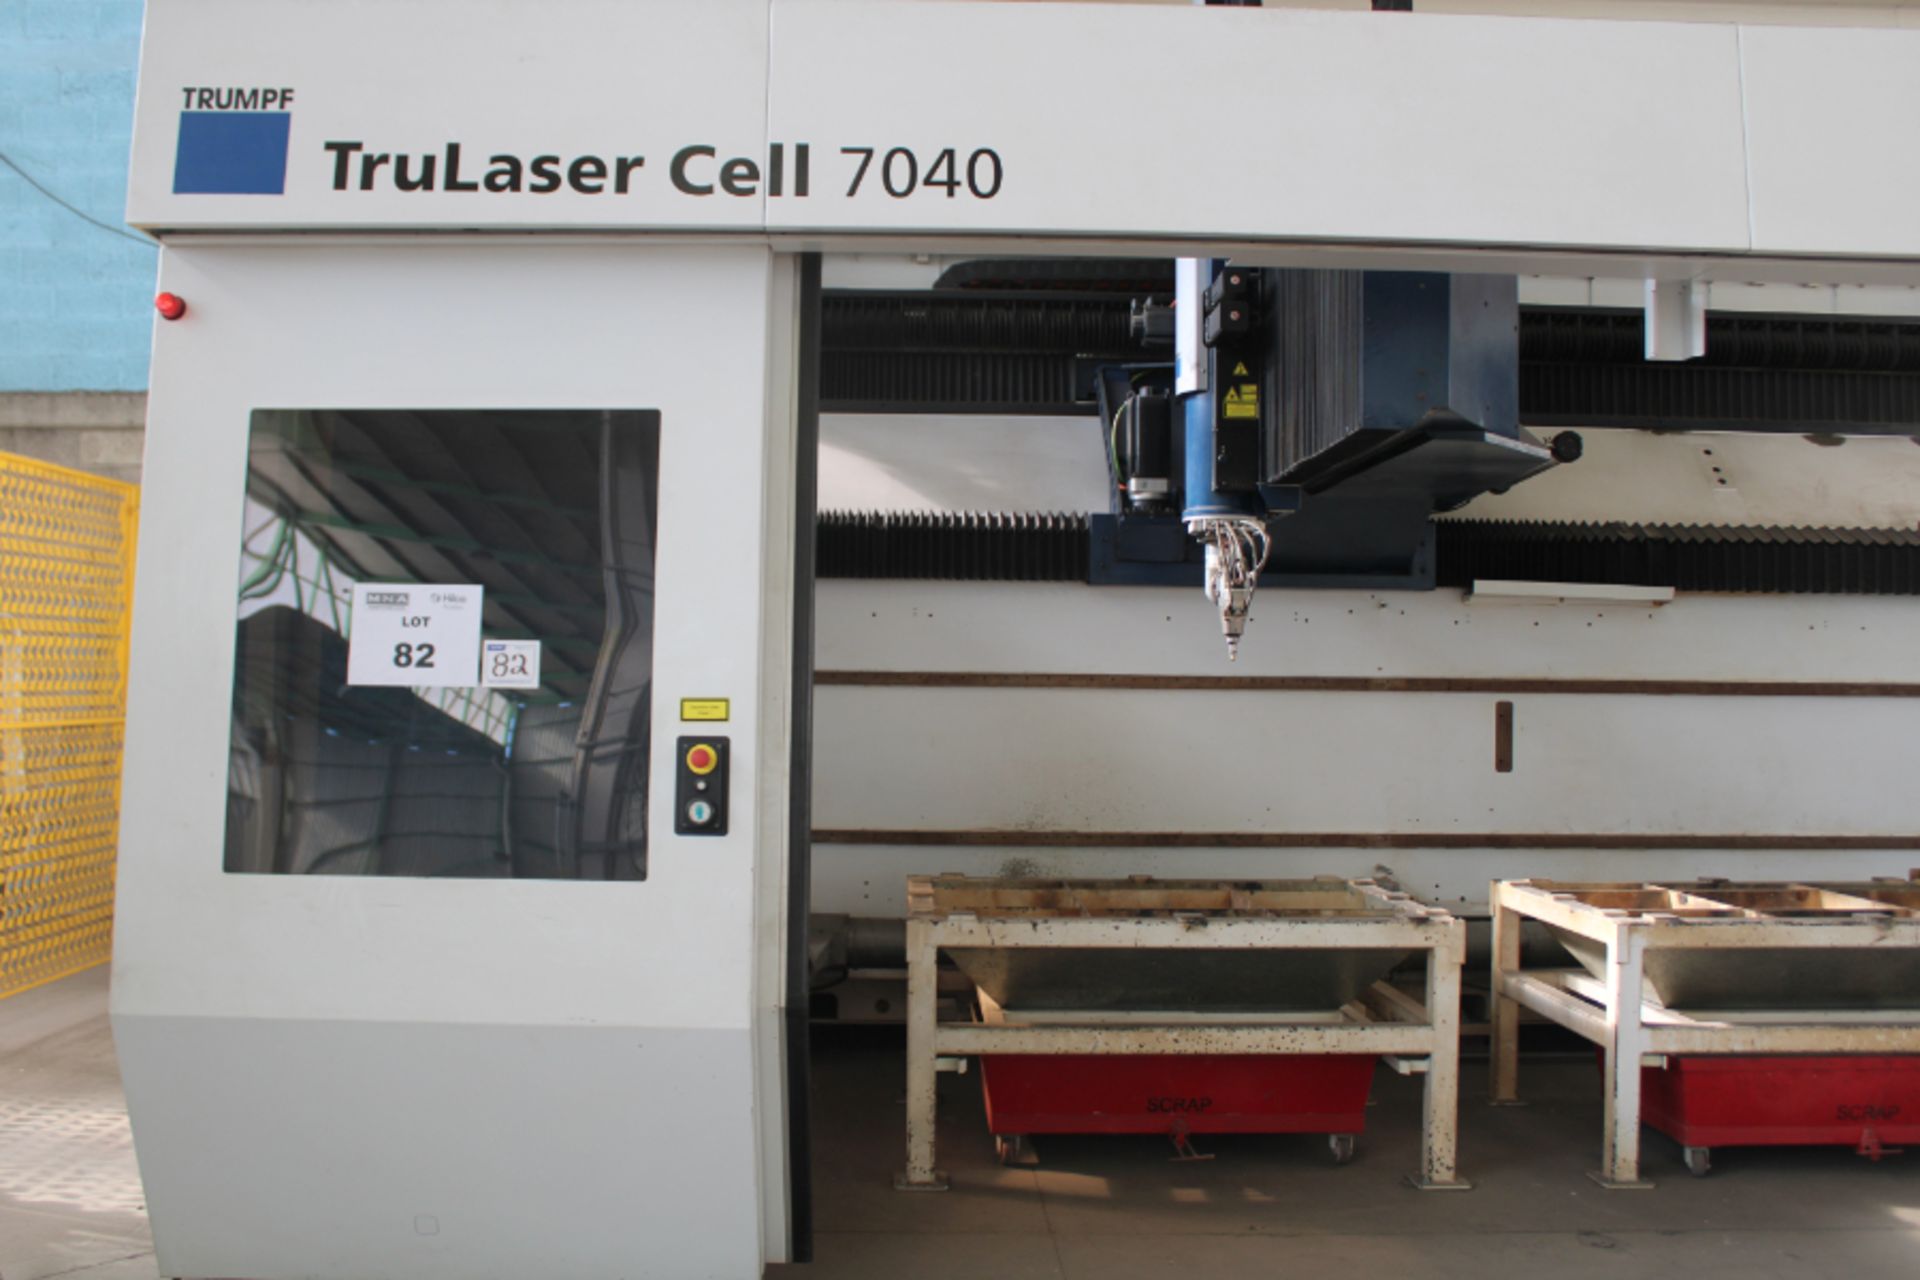 Trumpf Trulaser Cell 7040 3D Laser Cutter, 4000 W, 85 KVA, New 2017 - Image 4 of 15